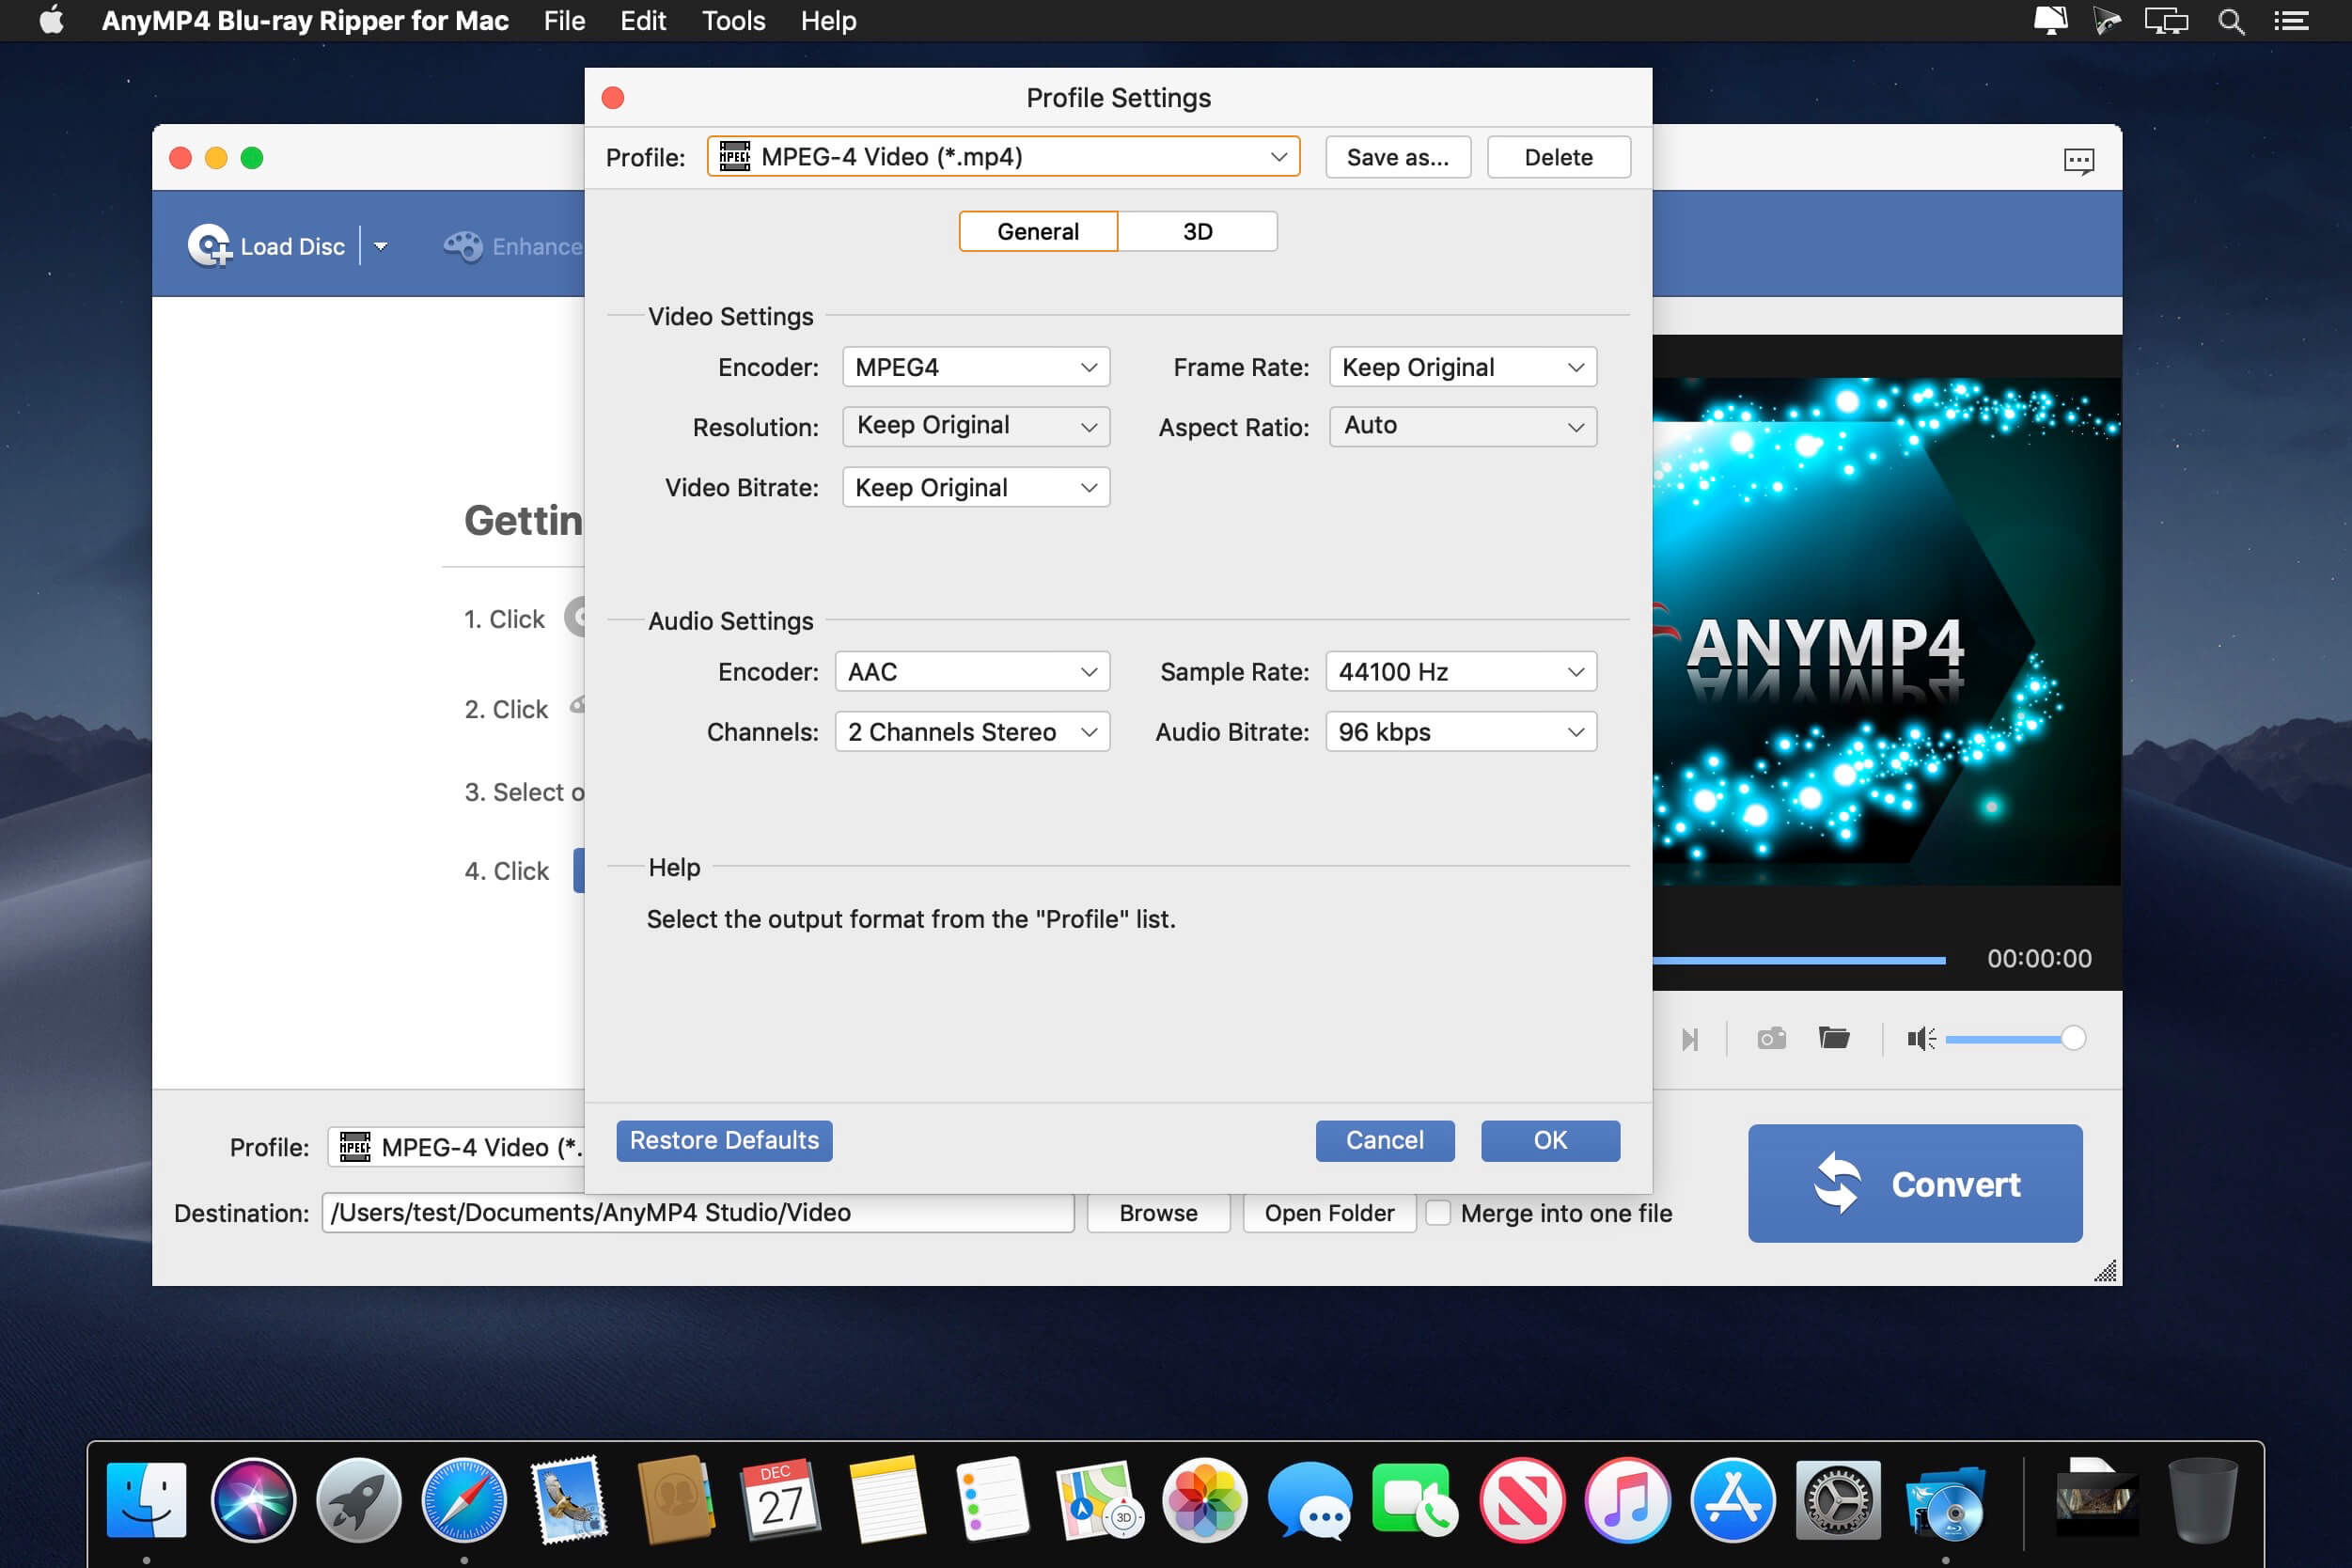 download the last version for apple AnyMP4 Blu-ray Ripper 8.0.93